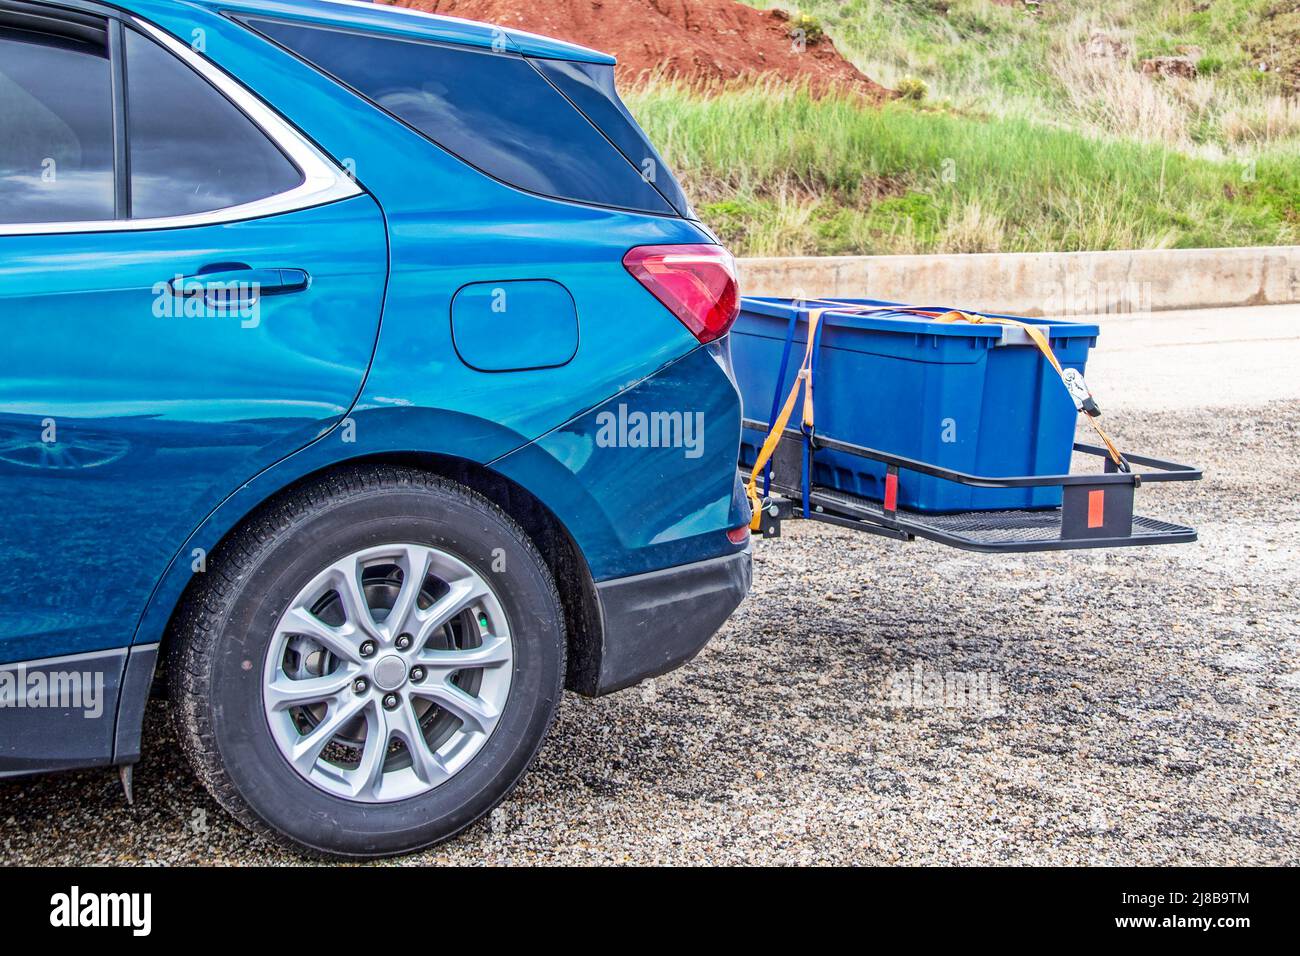 Blue hatchback car parked on gravel with hitch cargo carrier holding tied down rubber storage box on back - Closeup and cropped Stock Photo